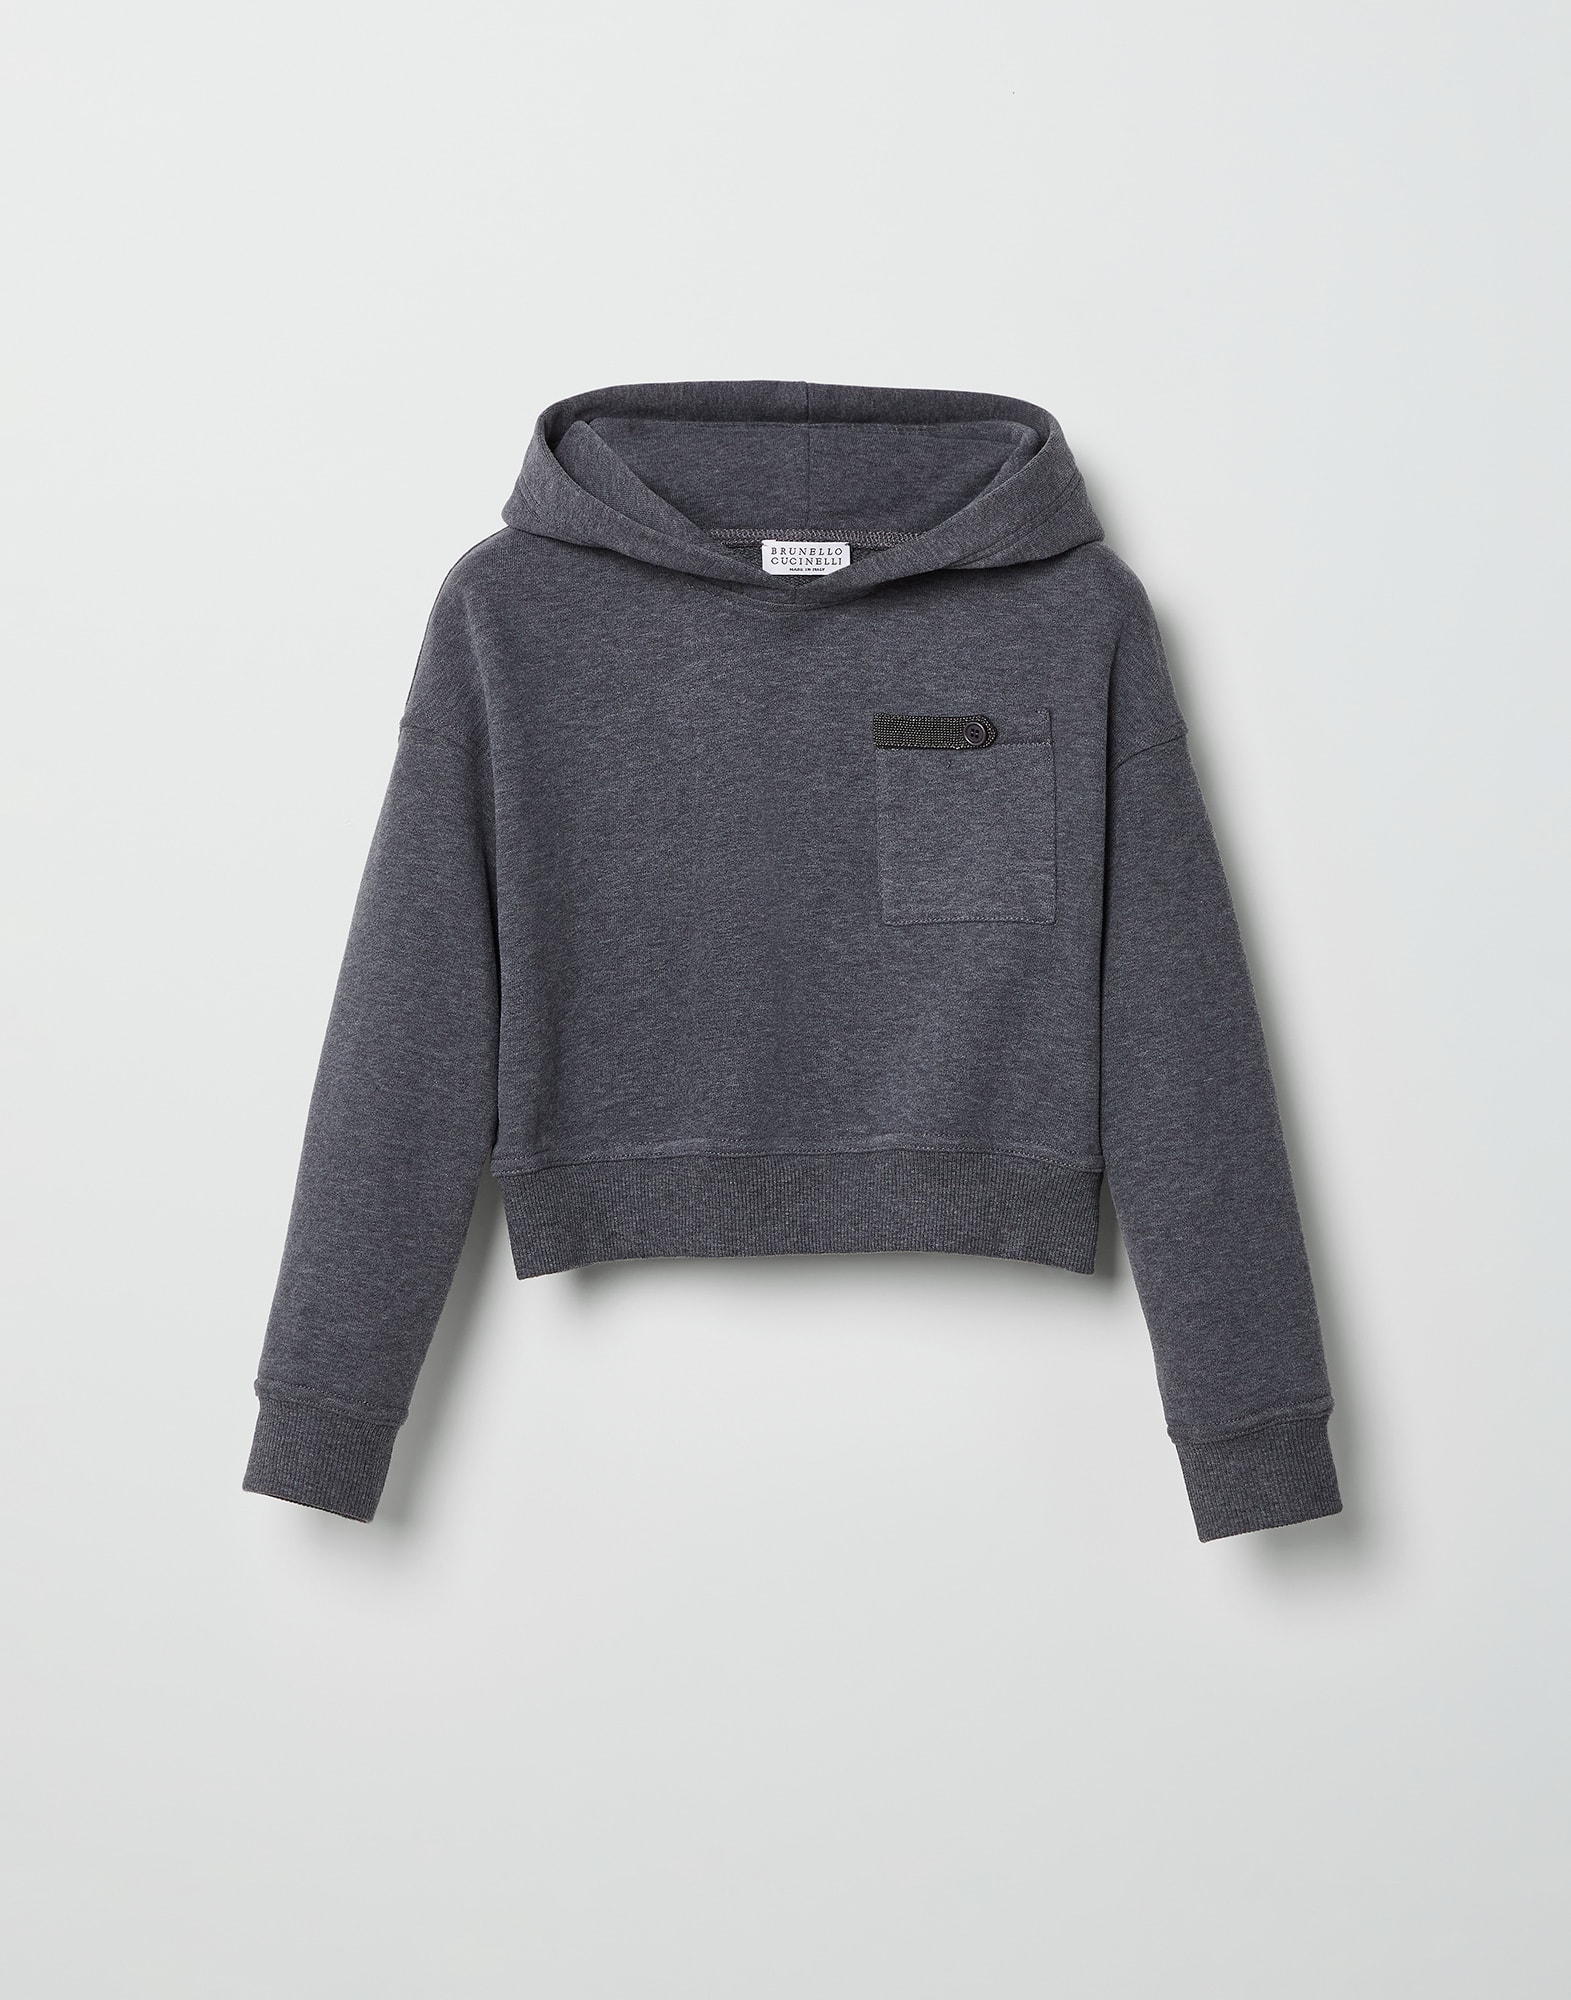 Smooth cotton French terry sweatshirt